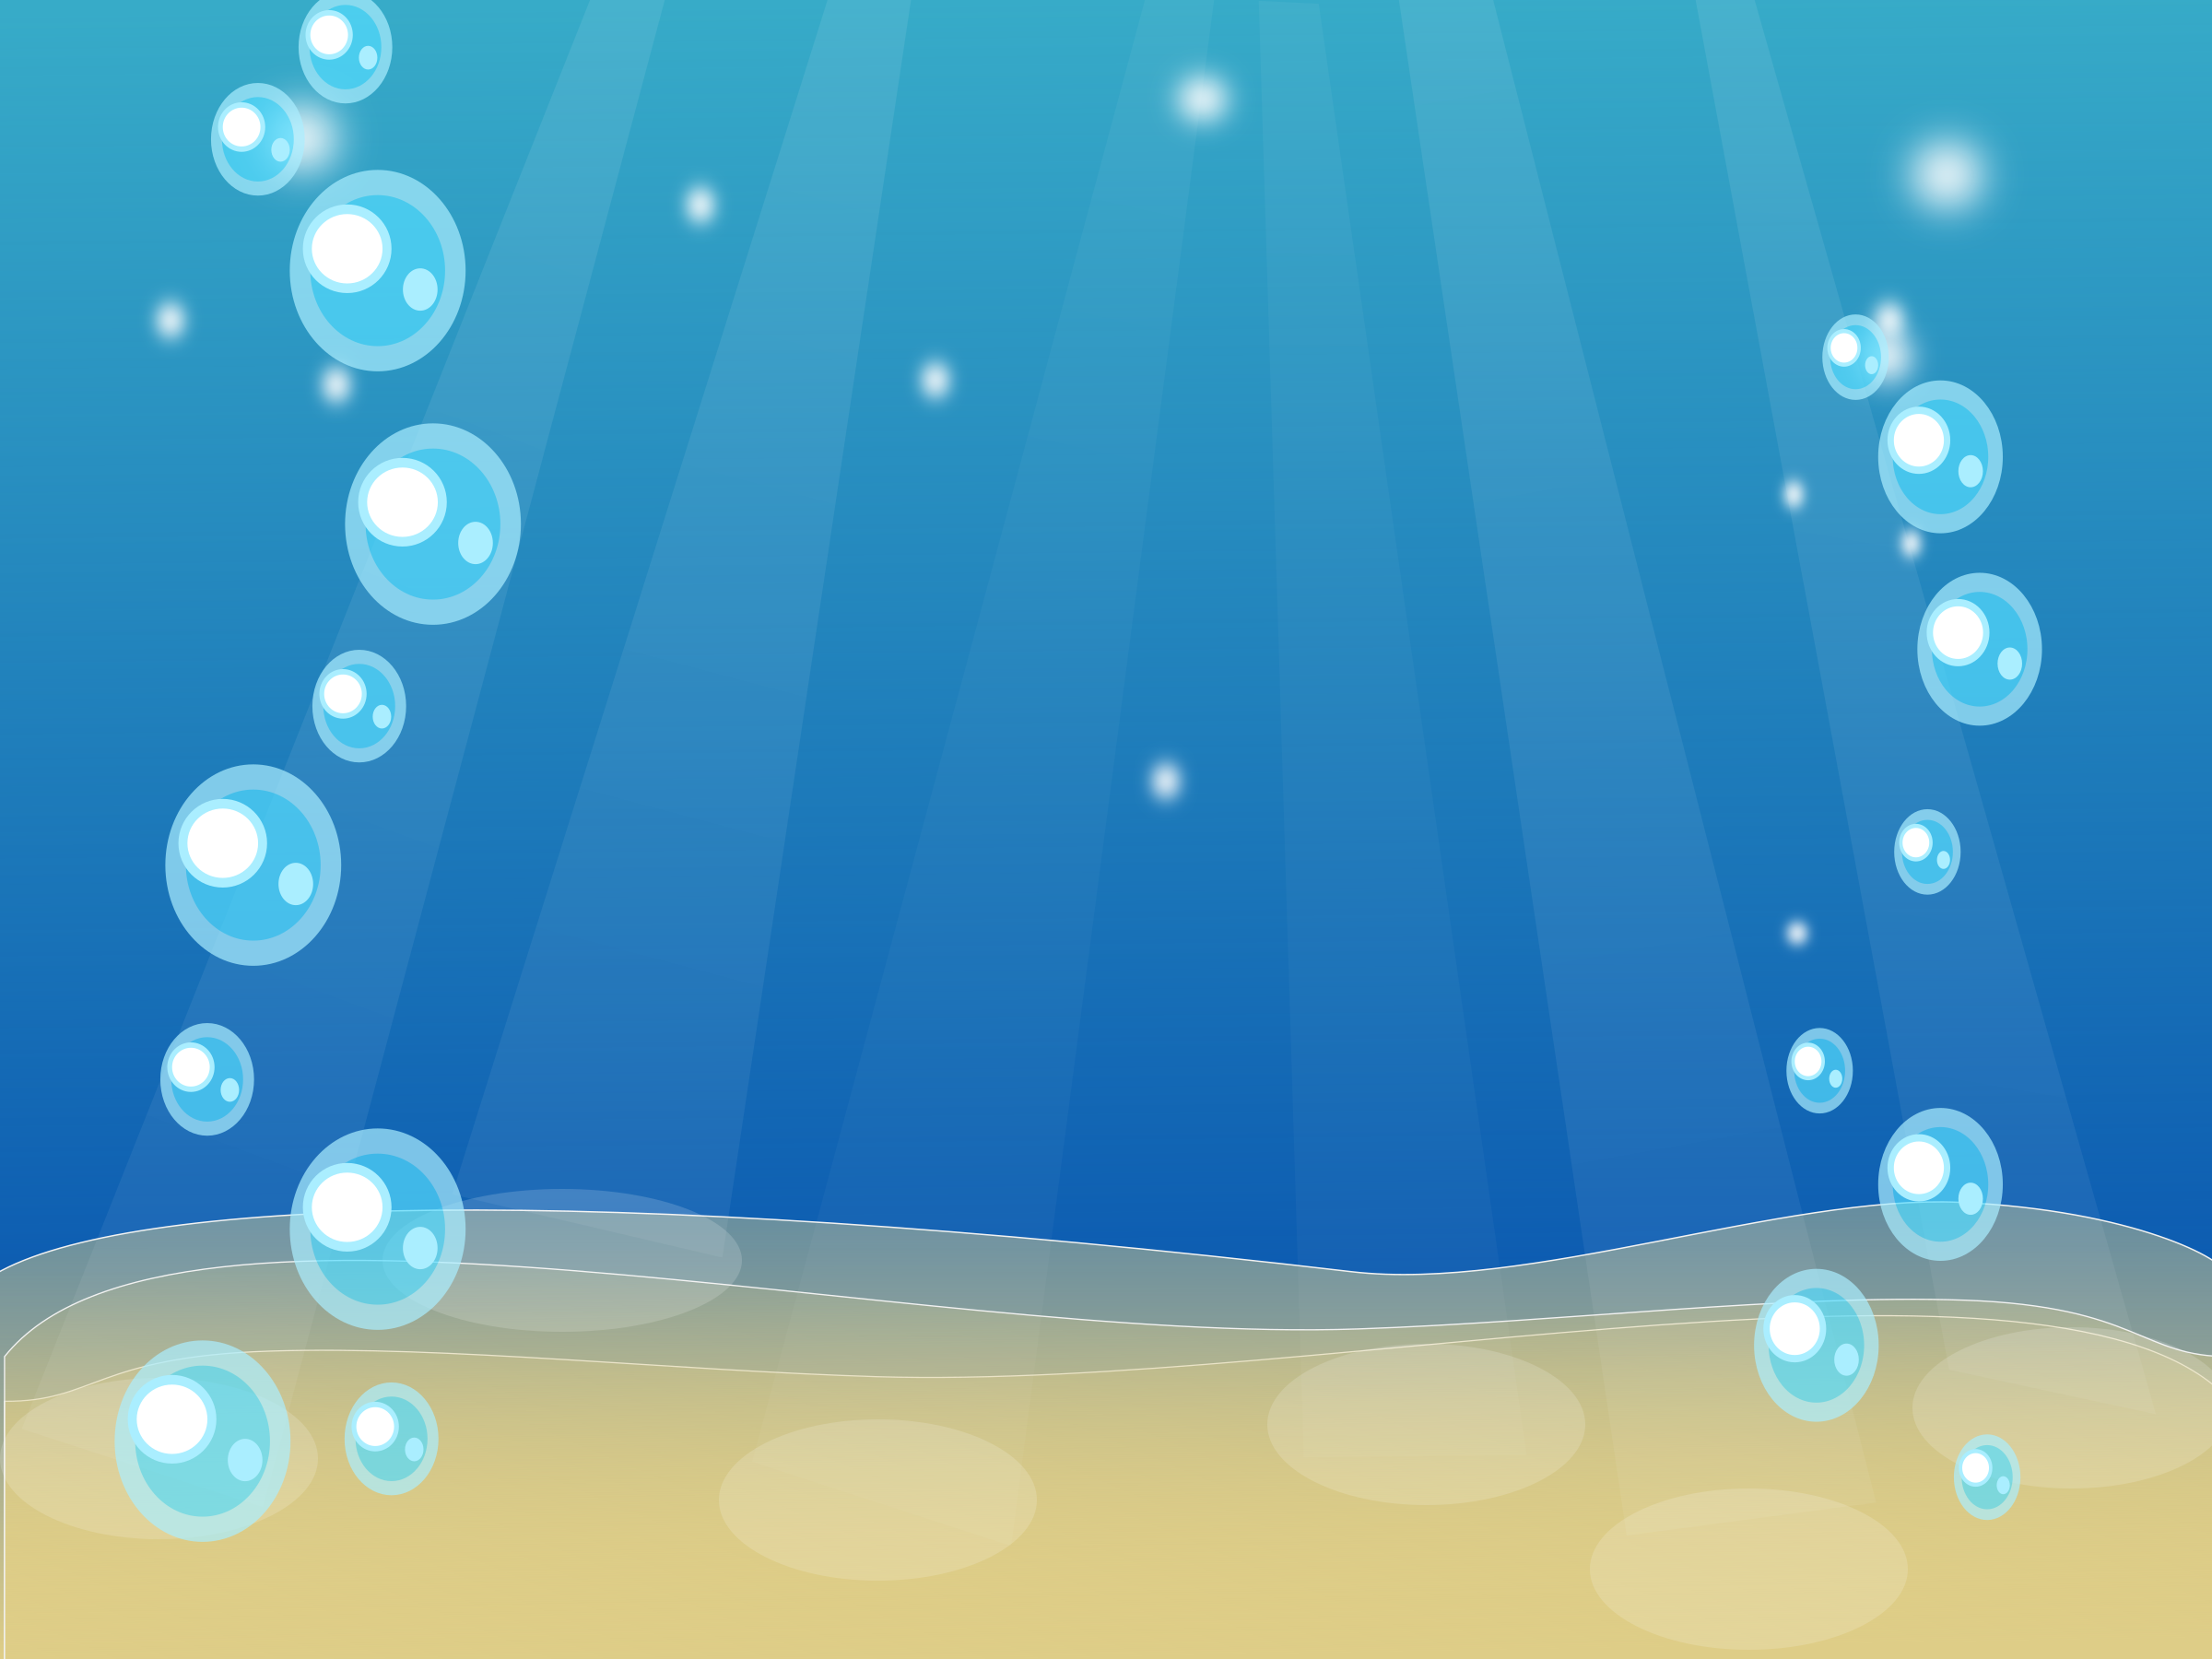 Bubbles in the water vector clipart image